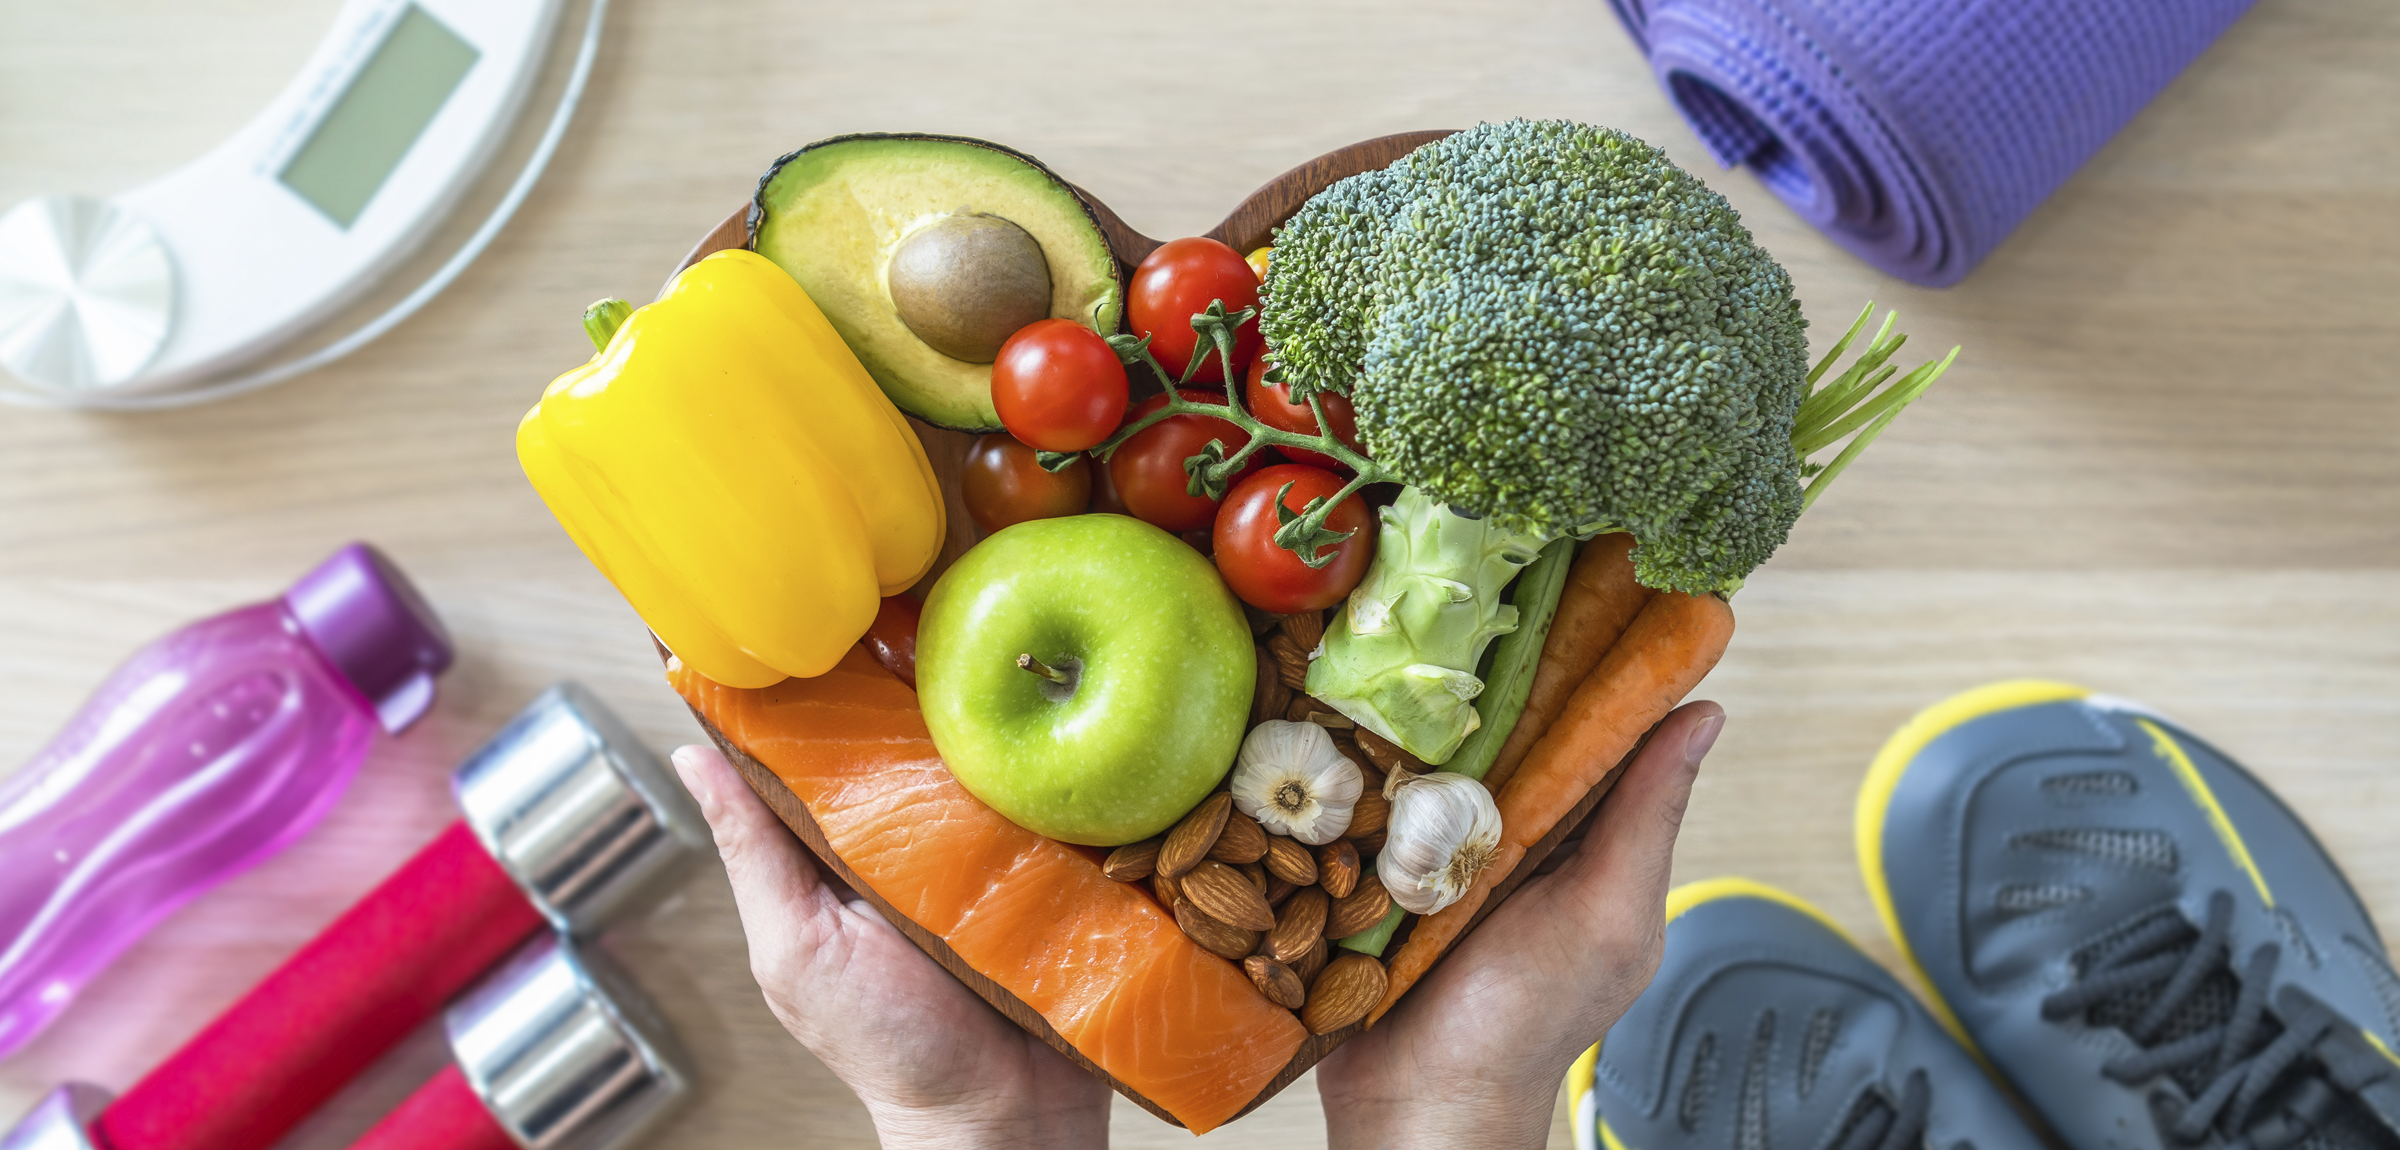 The background is a light wood table or floor. There is a scale, a yoga mat, weights, and running shoes in each corner. In the foreground two hands hold fruits, vegetables, nuts and salmon. These items of food are arranged in a heart shape. 